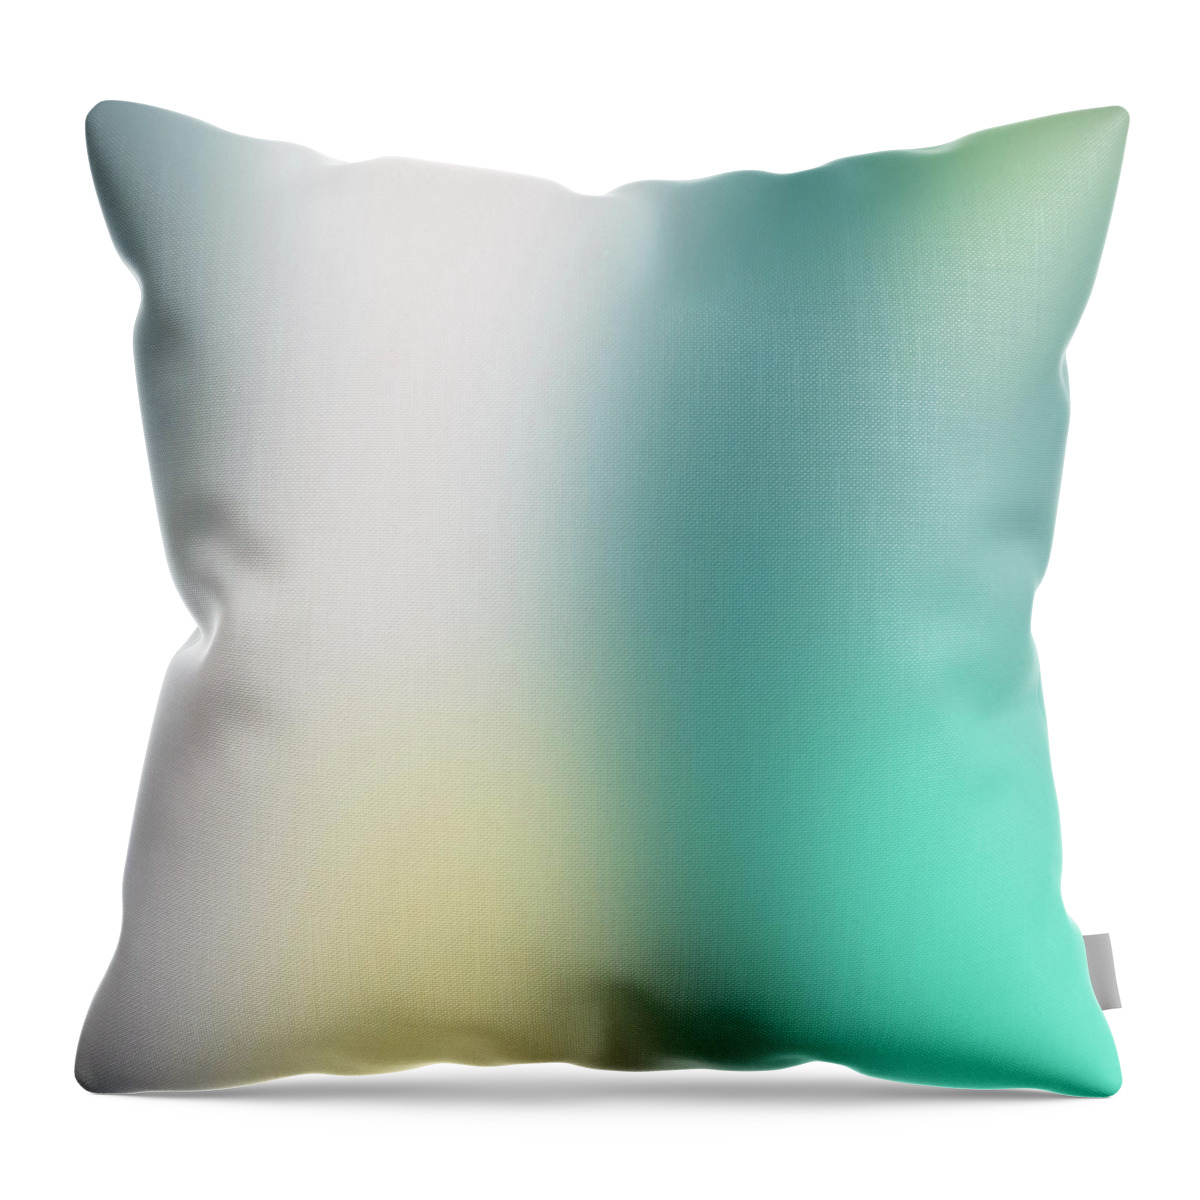 Abstract Throw Pillow featuring the mixed media A Fleeting Glimpse 2- Art by Linda Woods by Linda Woods